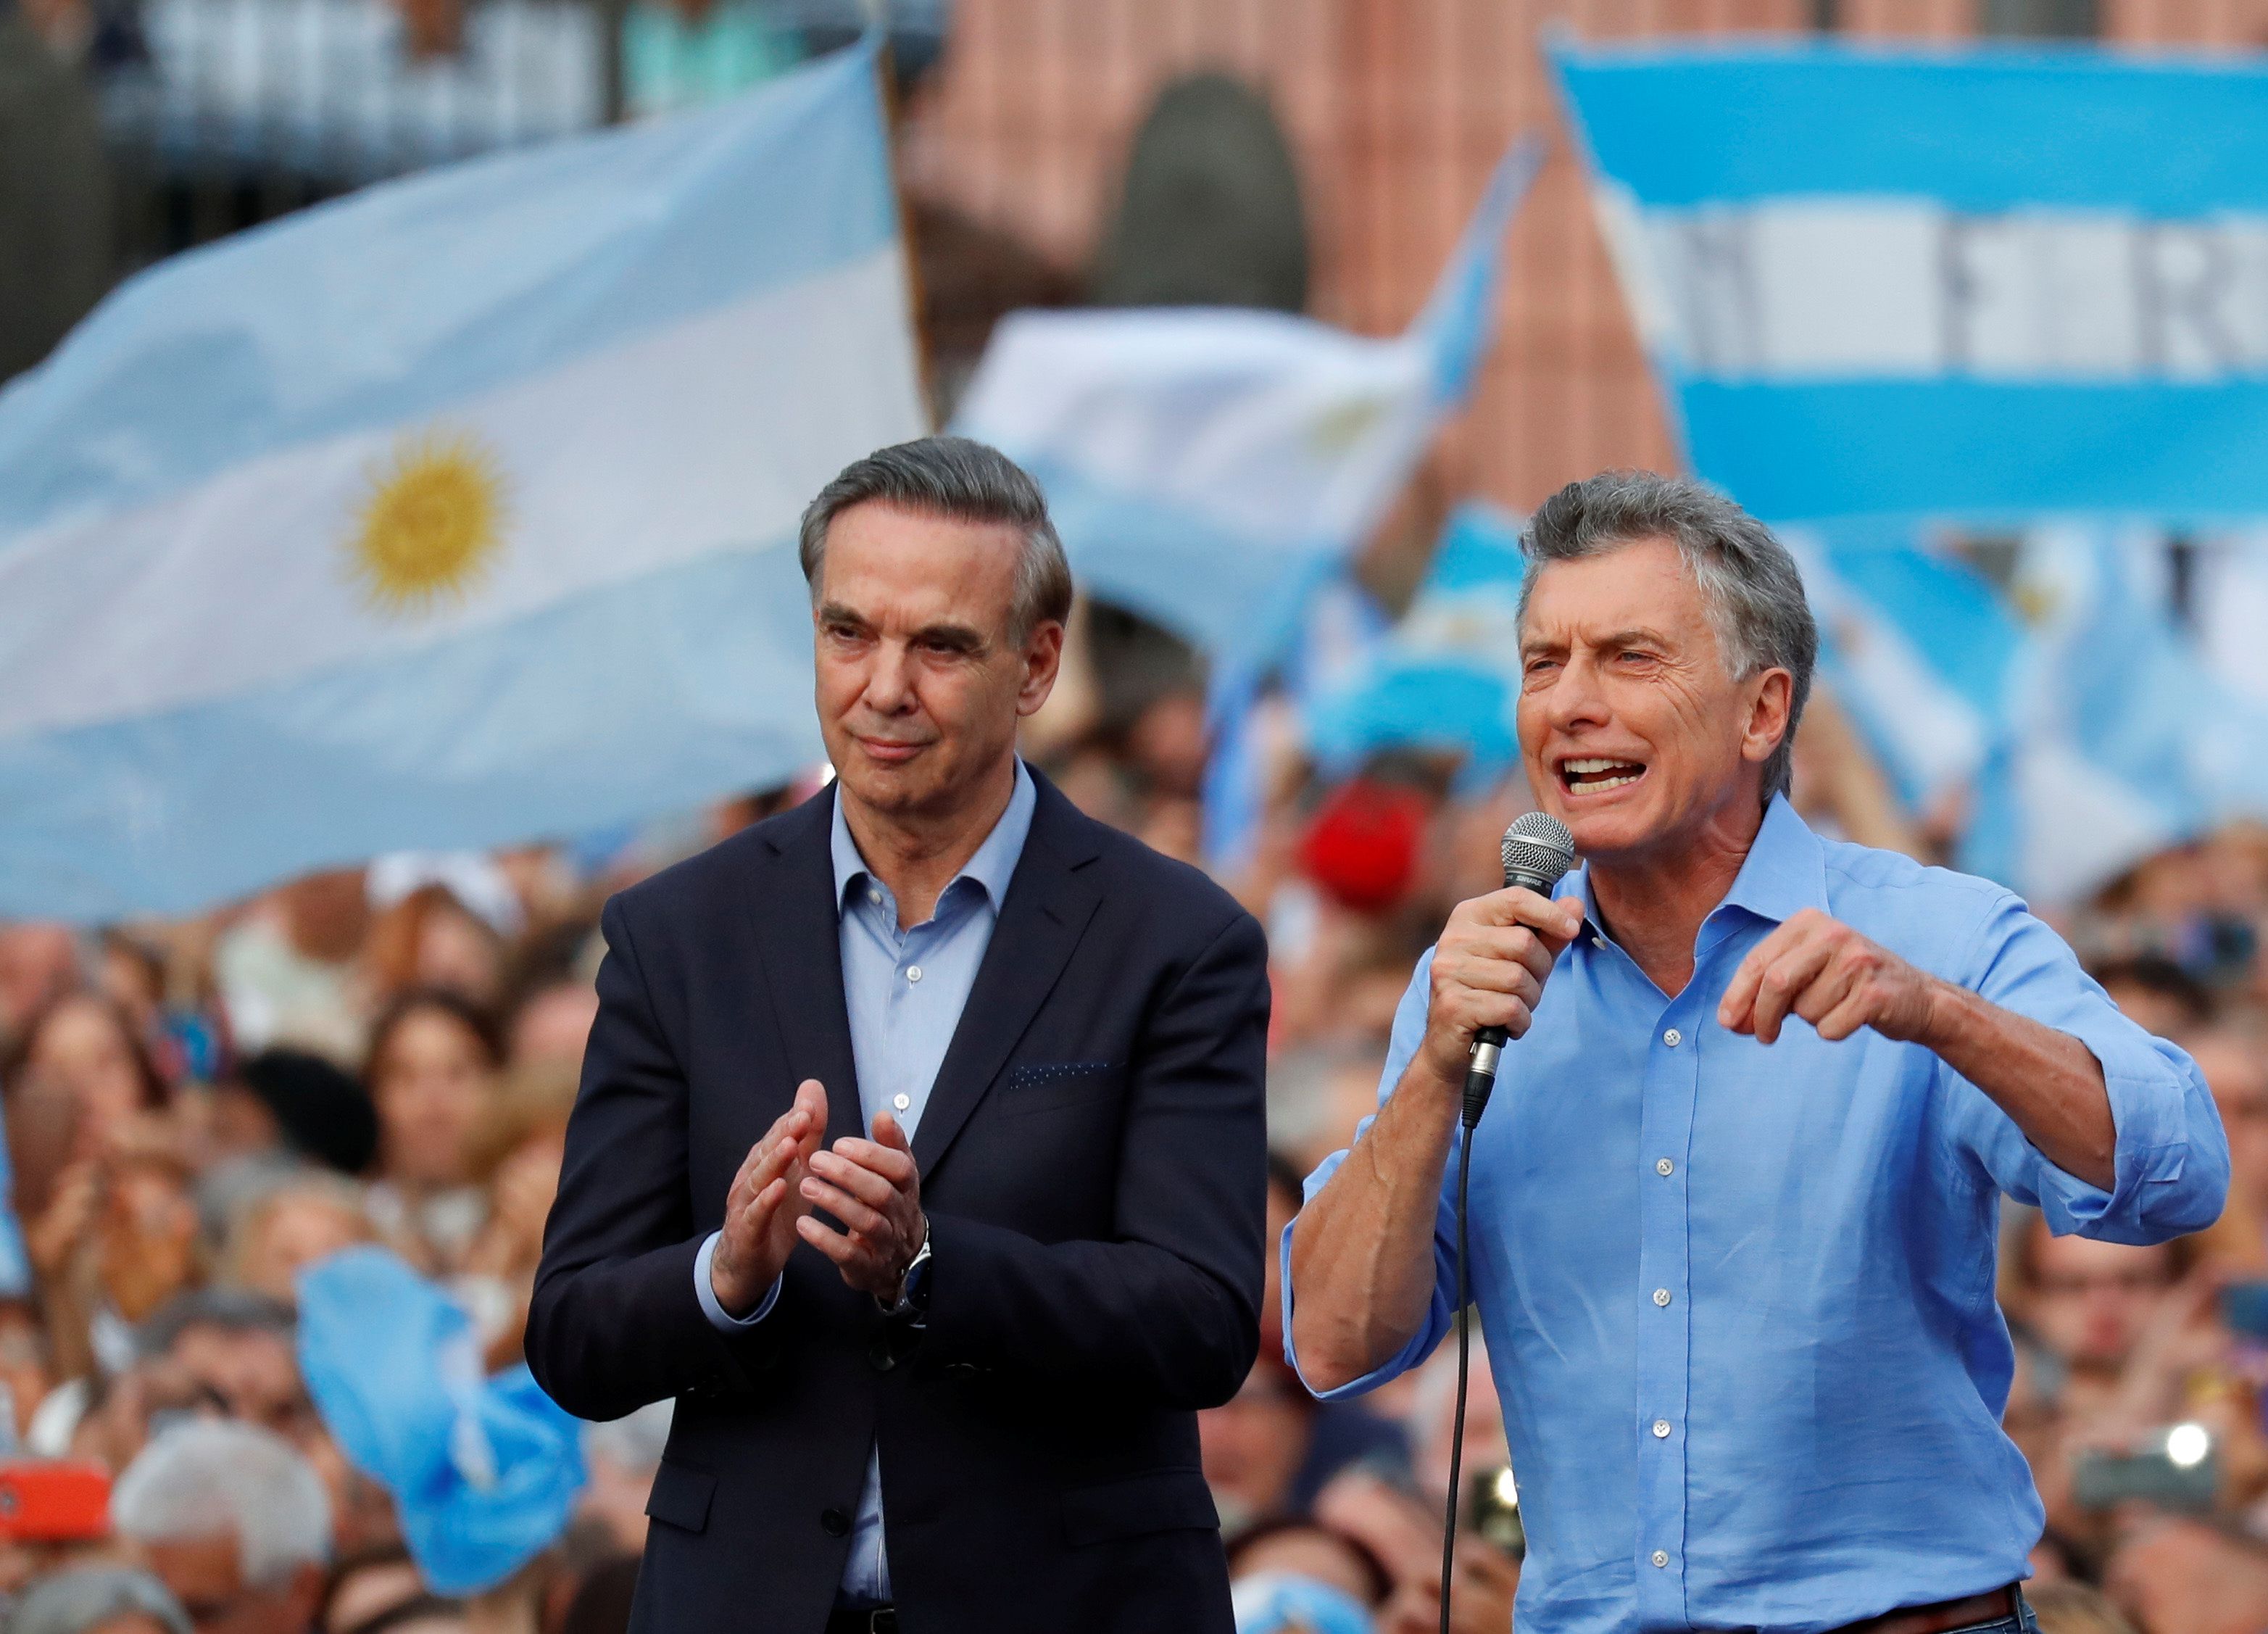 Argentina's outgoing president Mauricio Macri and his running mate Miguel Angel Pichetto greet supporters outside the Casa Rosada presidential palace during a rally in Buenos Aires, Argentina, December 7, 2019. REUTERS/Agustin Marcarian